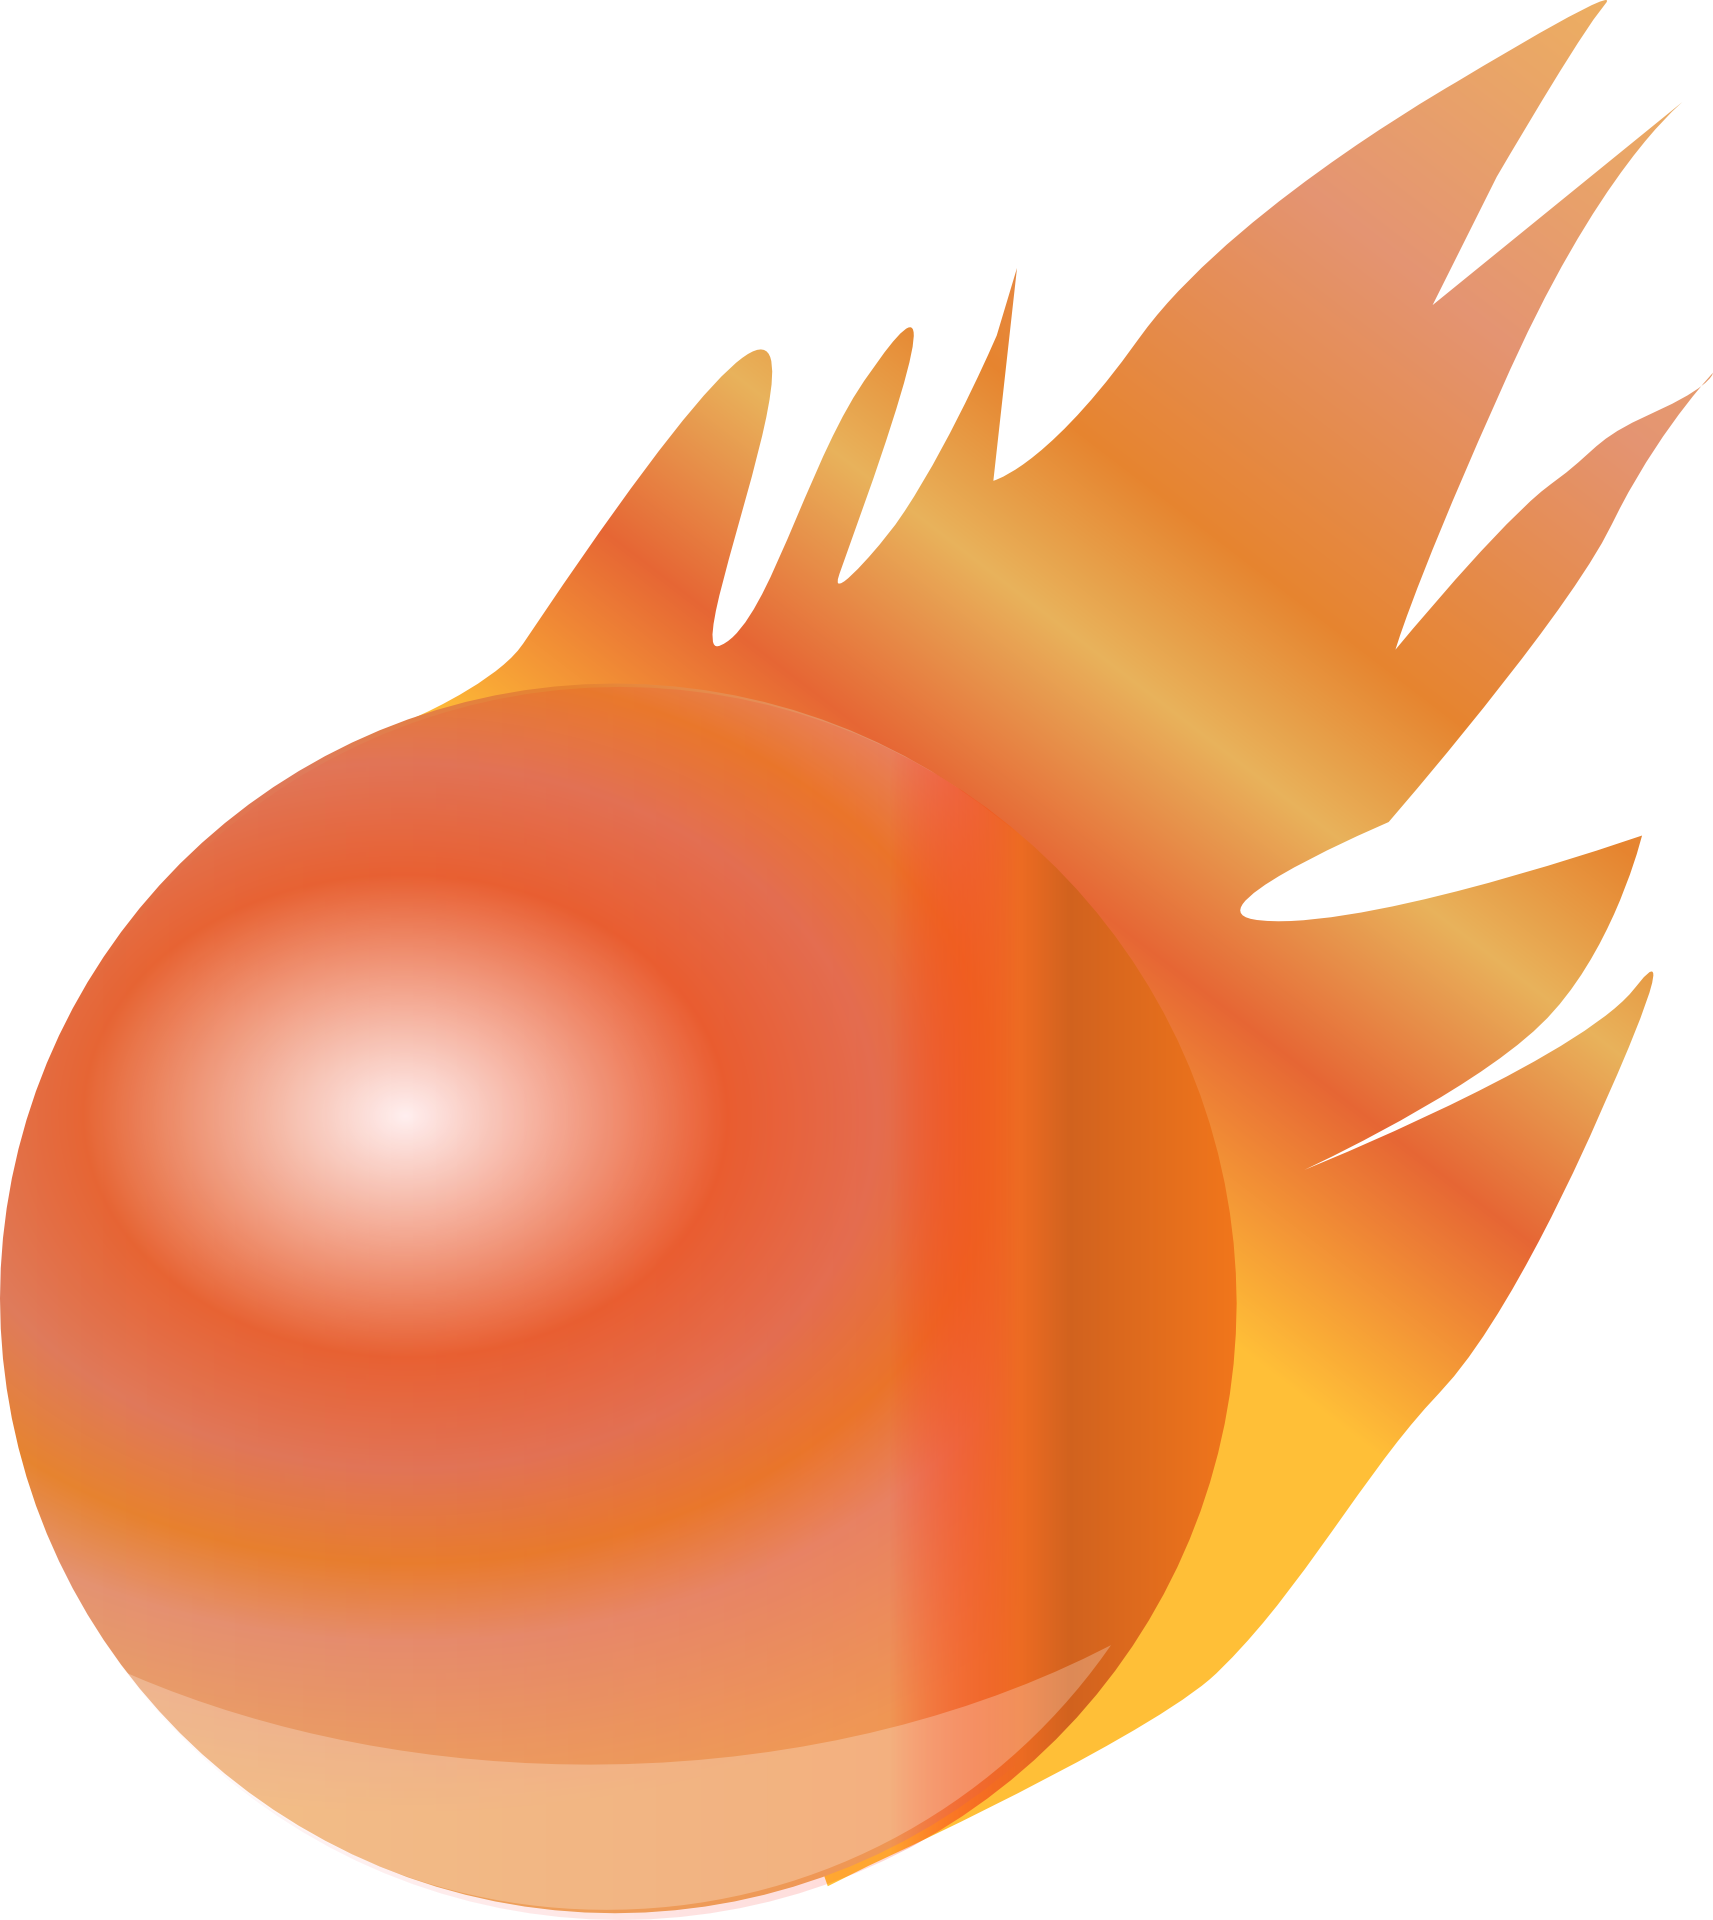 Fireball as a drawing free image download